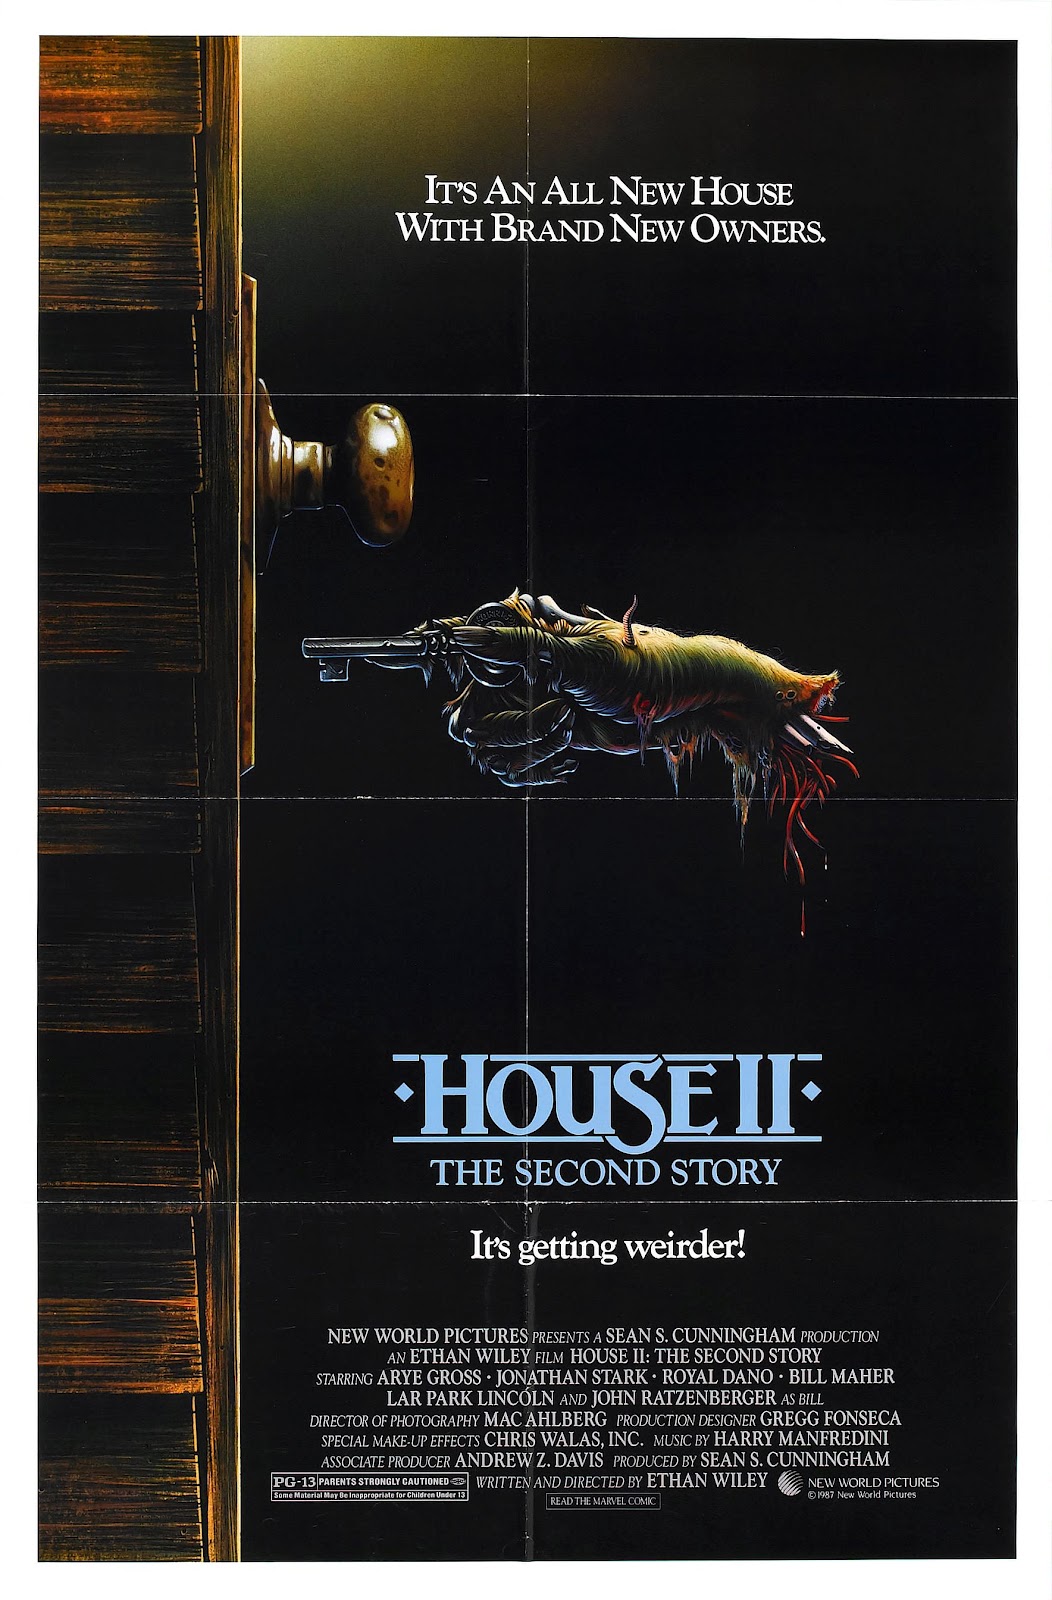 Retro Memories of mine: HORROR MOVIE POSTERS FROM THE 80'S